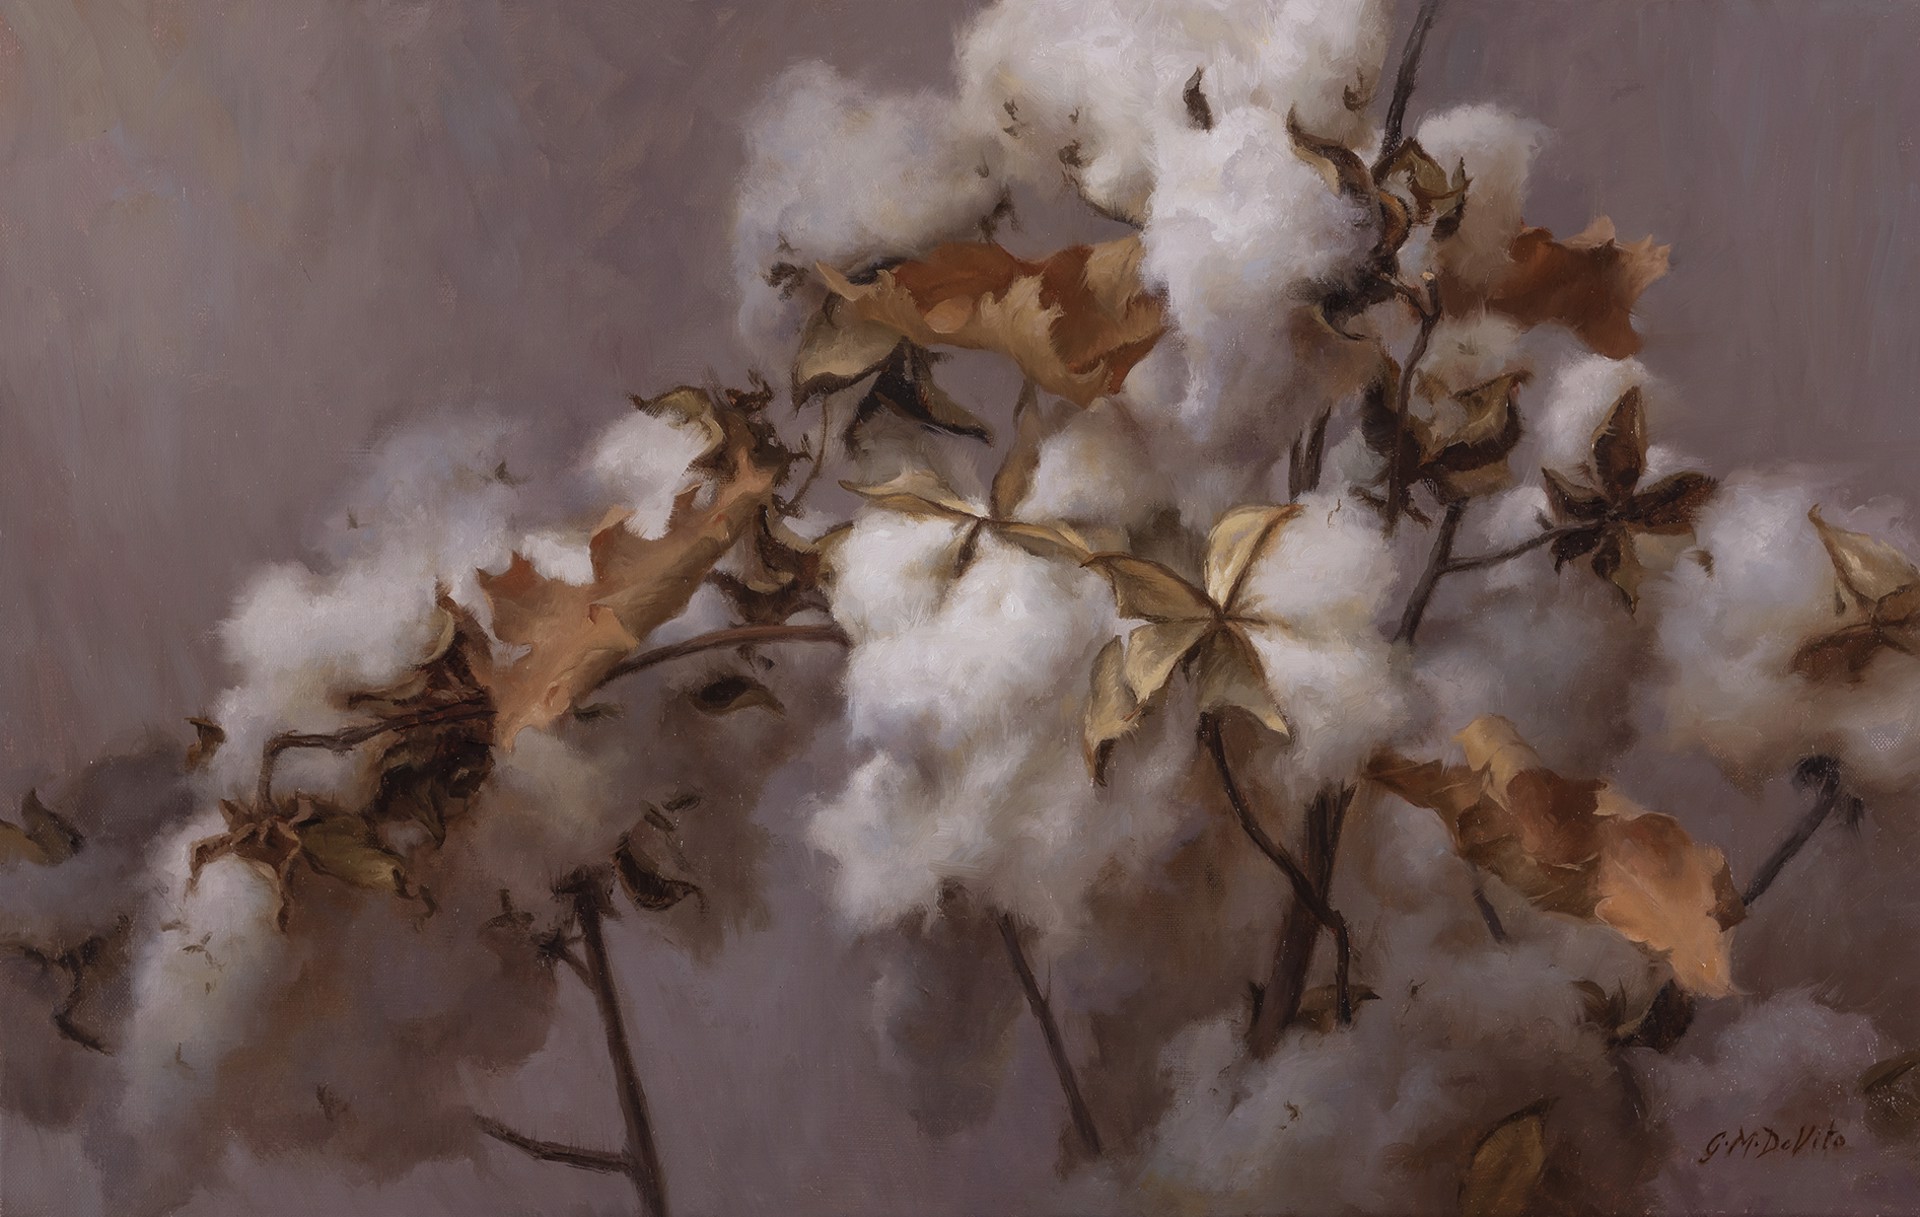 GRACE M DEVITO, "Cotton and Oak" by Oil Painters of America